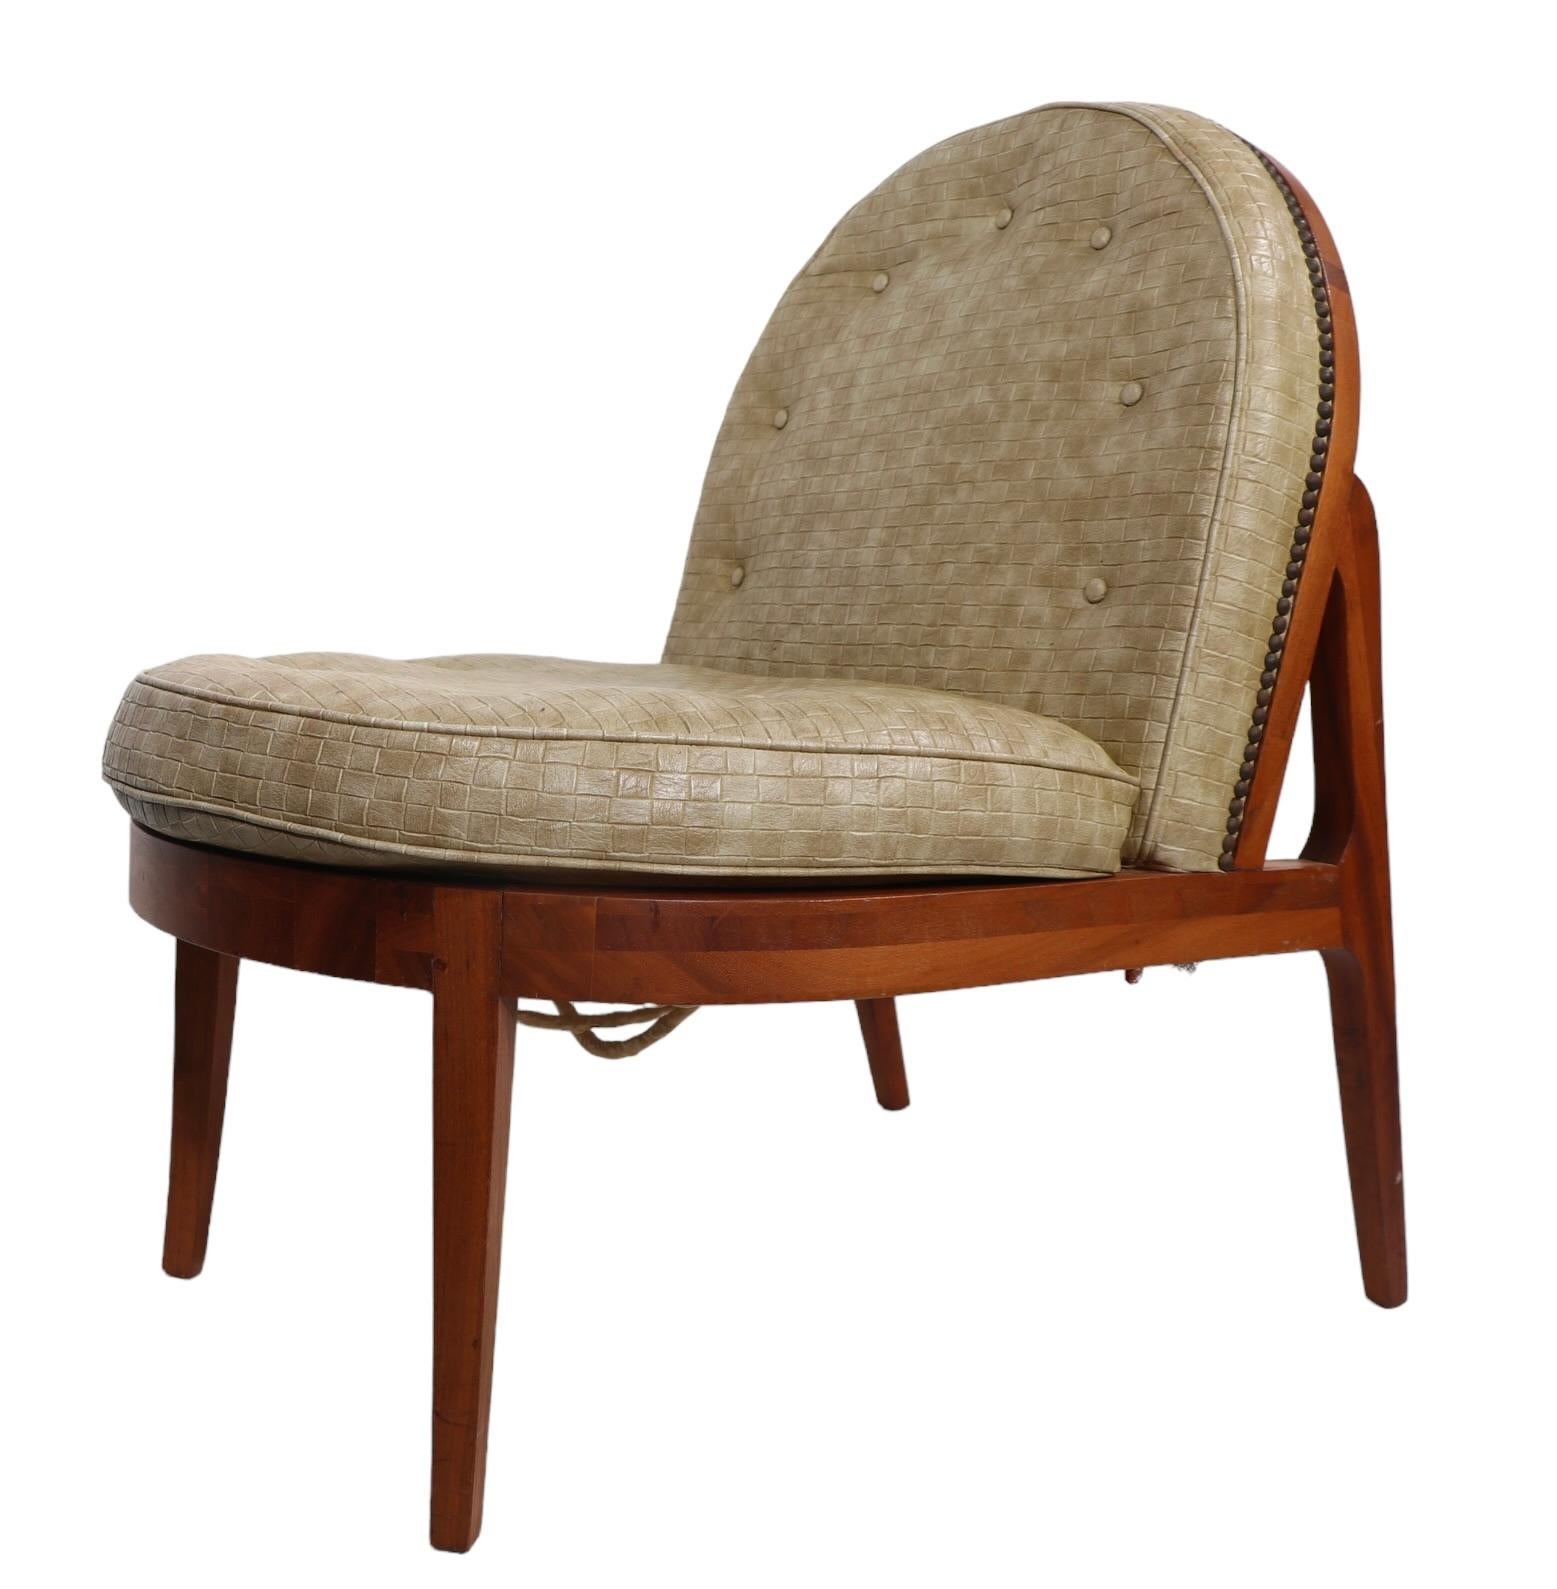 20th Century Mid Century Lounge Chair after Wormley c 1950's For Sale